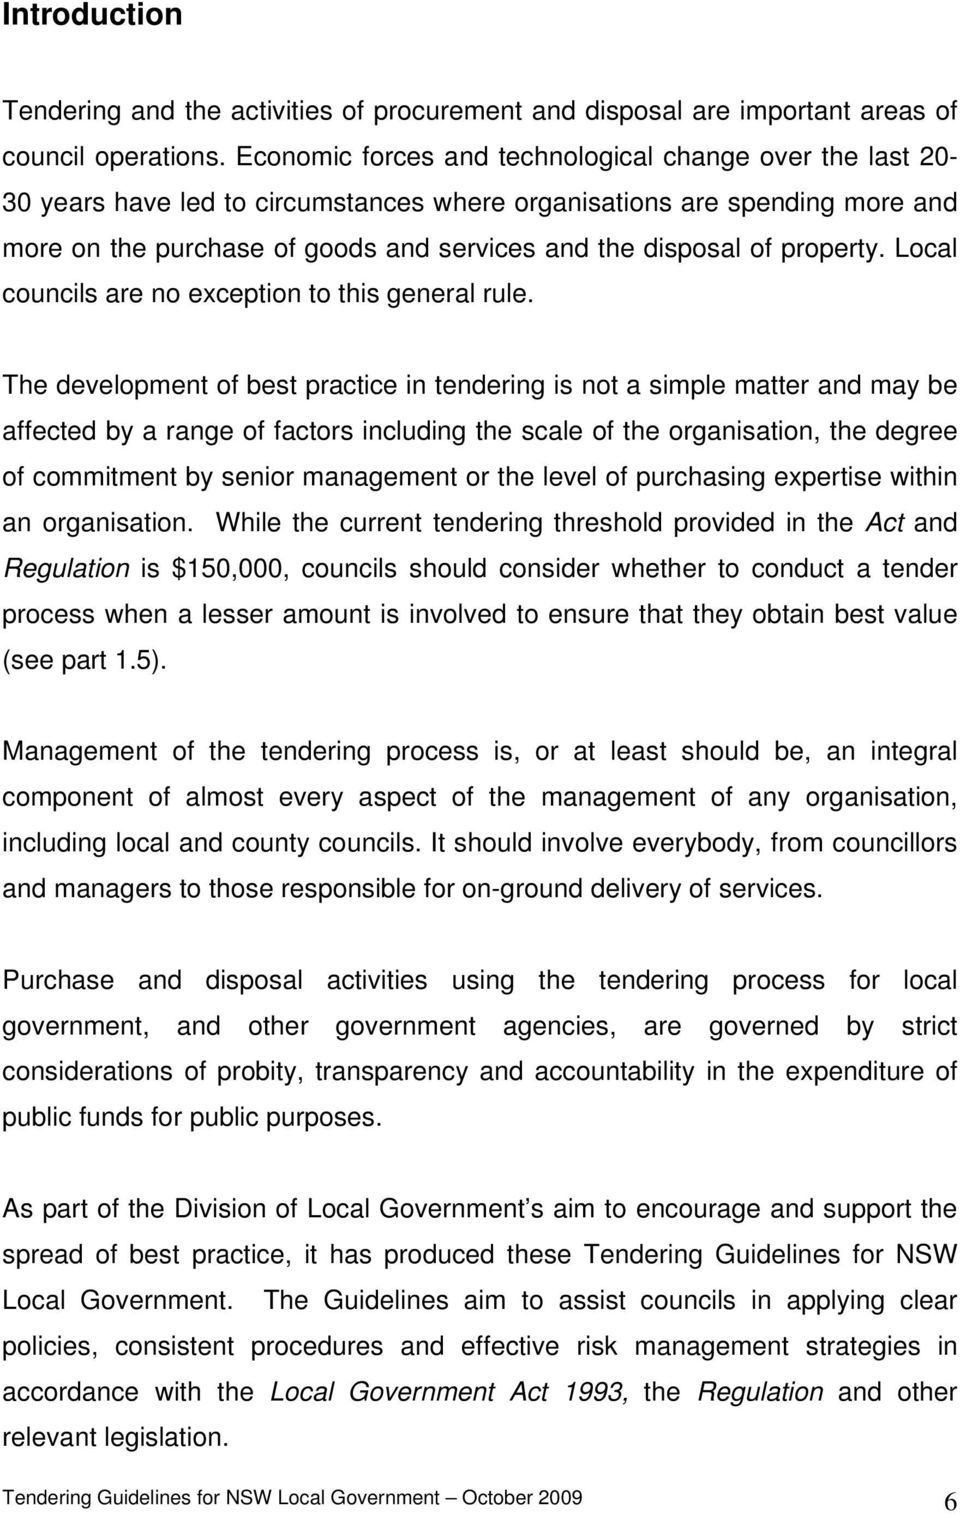 property. Local councils are no exception to this general rule.